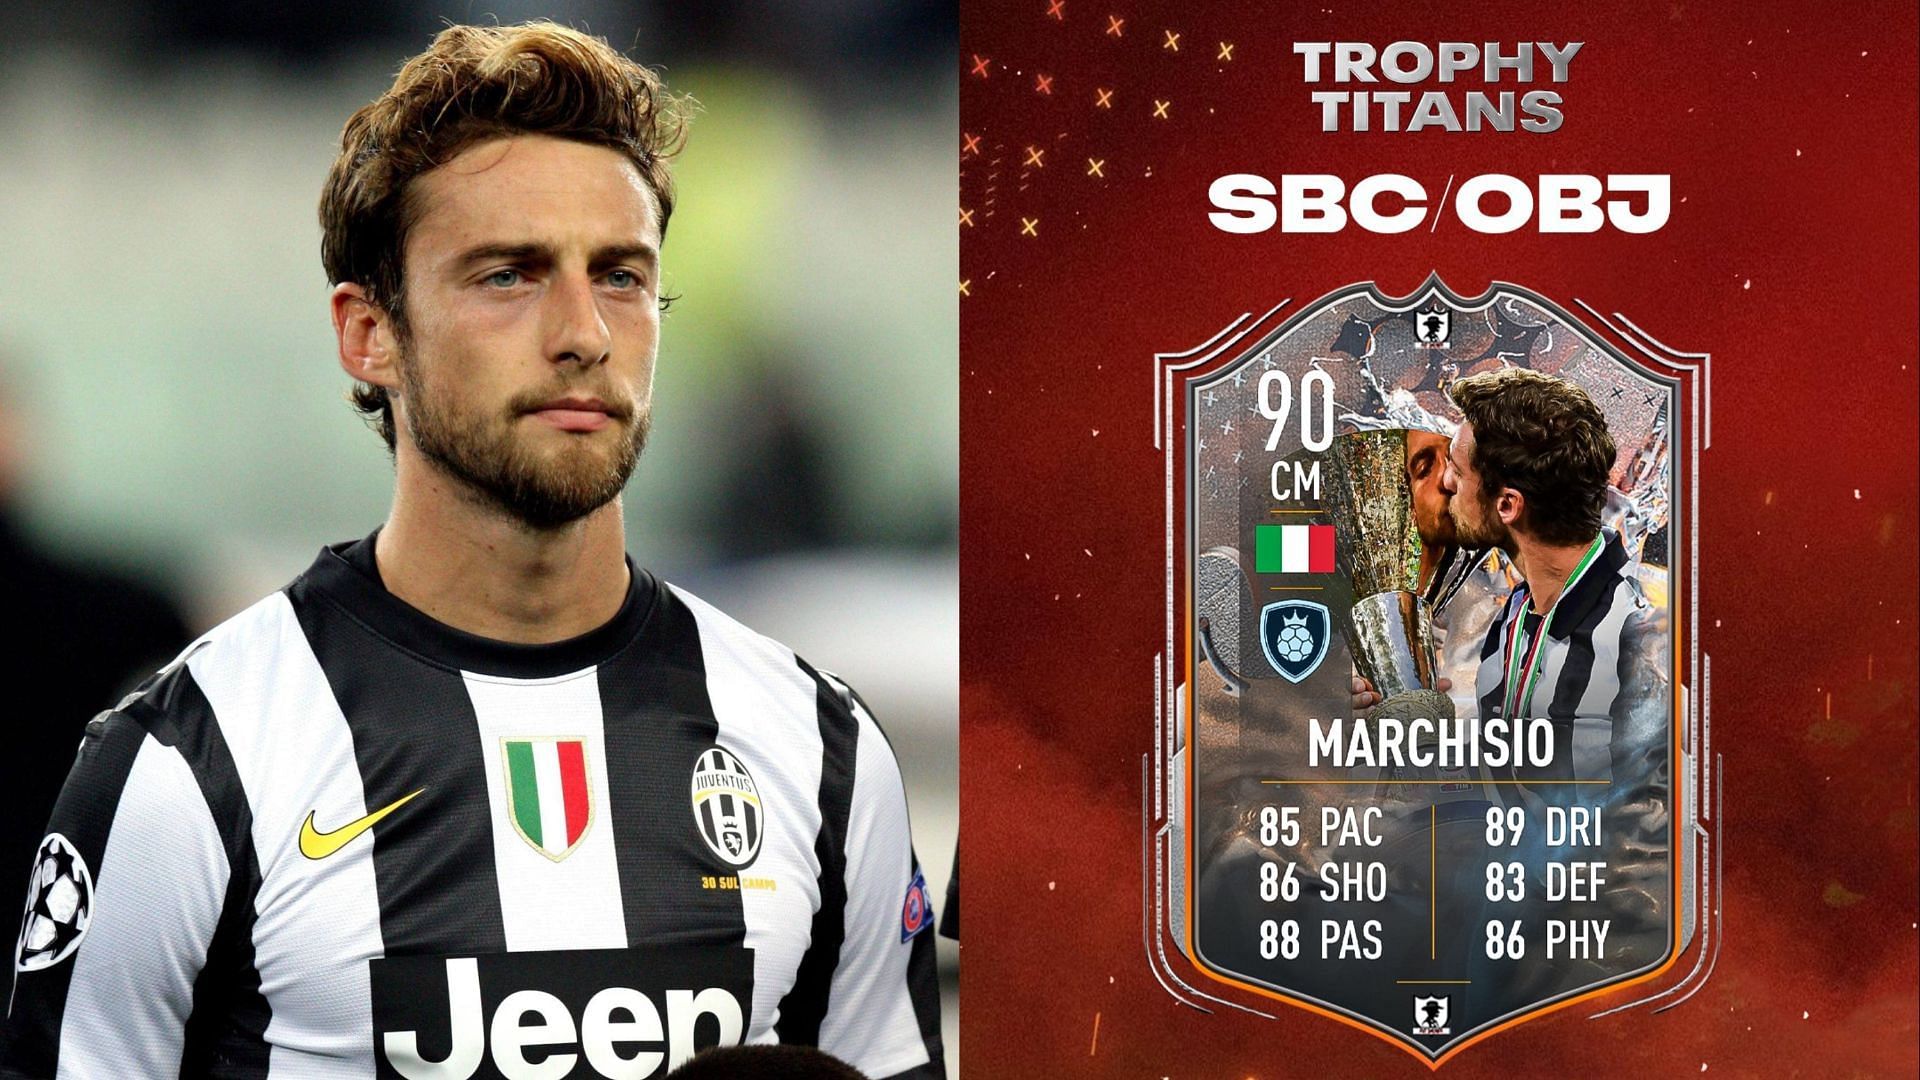 The Claudio Marchisio Trophy Titans SBC will certainly be in the plans of many FIFA 23 players (Images via IMDB, Twitter/FUT Sheriff)